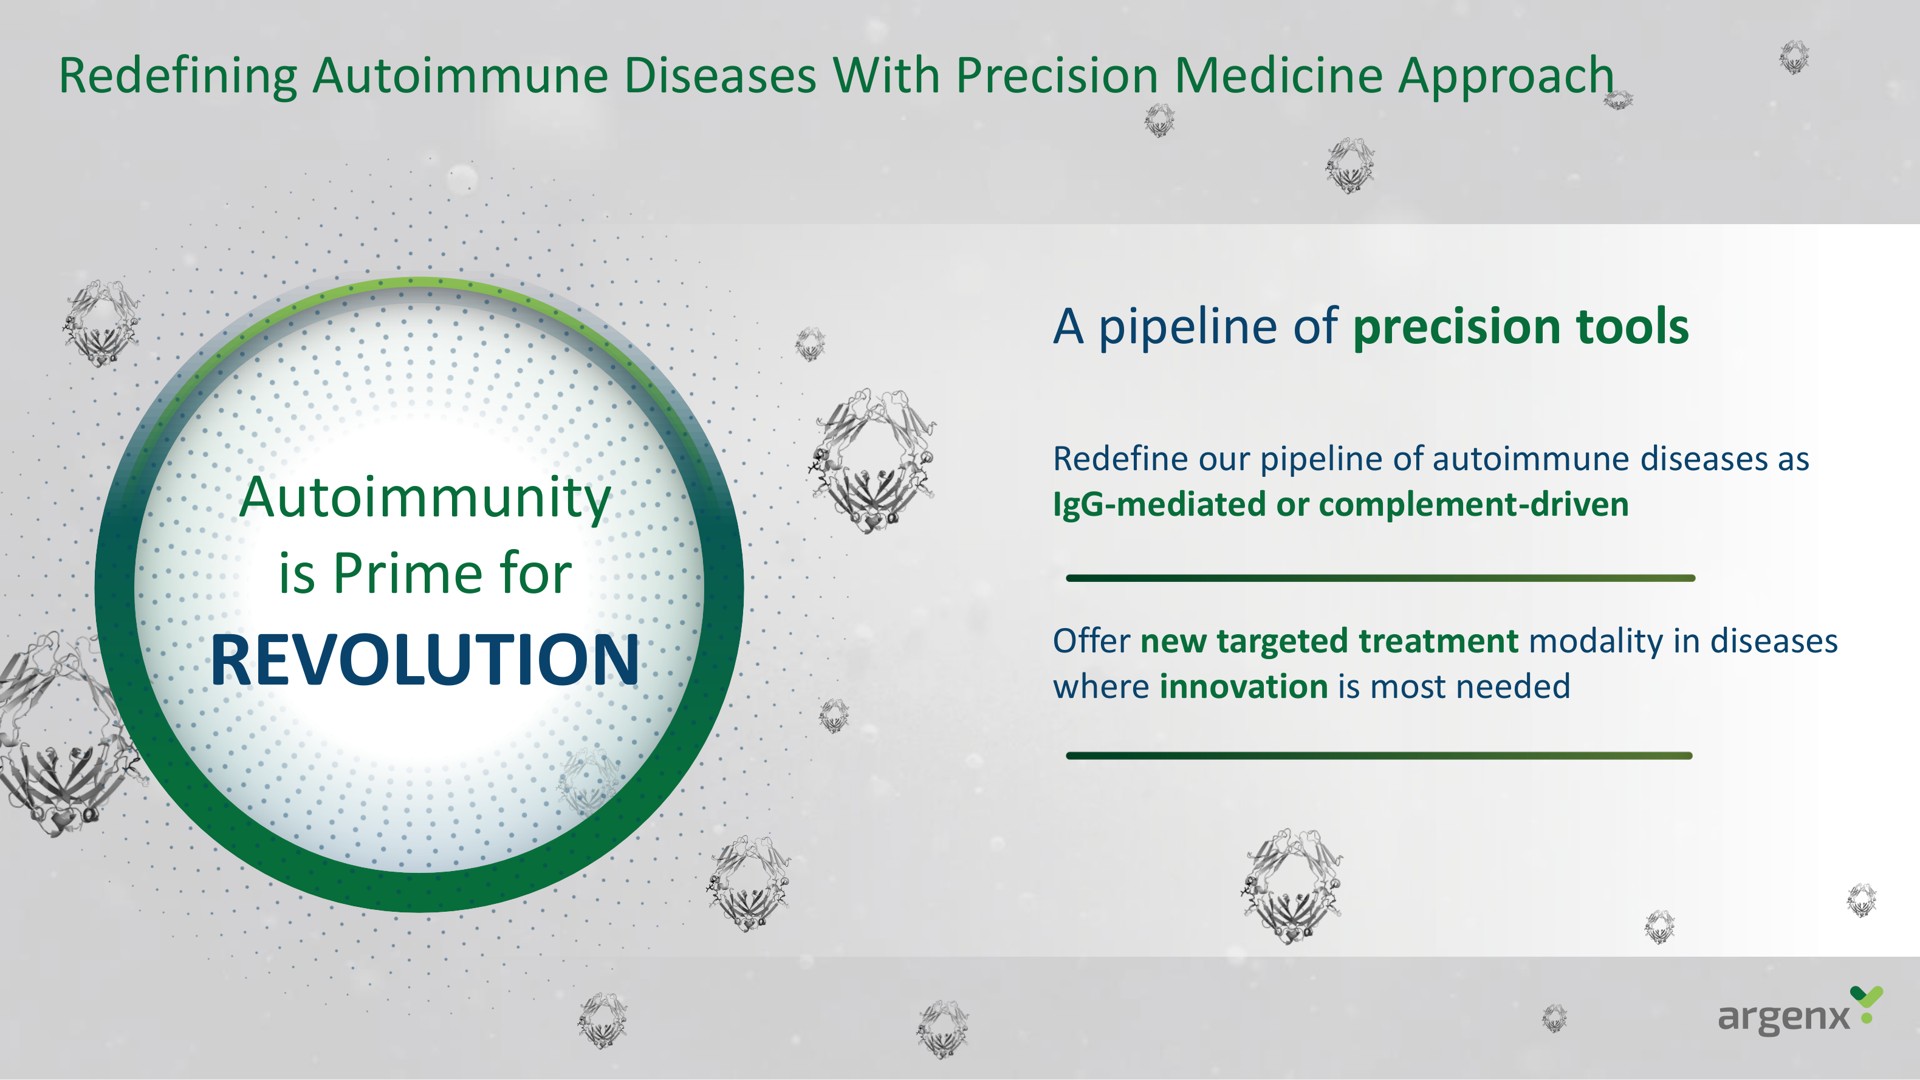 redefining diseases with precision medicine approach autoimmunity is prime for revolution a pipeline of precision tools | argenx SE